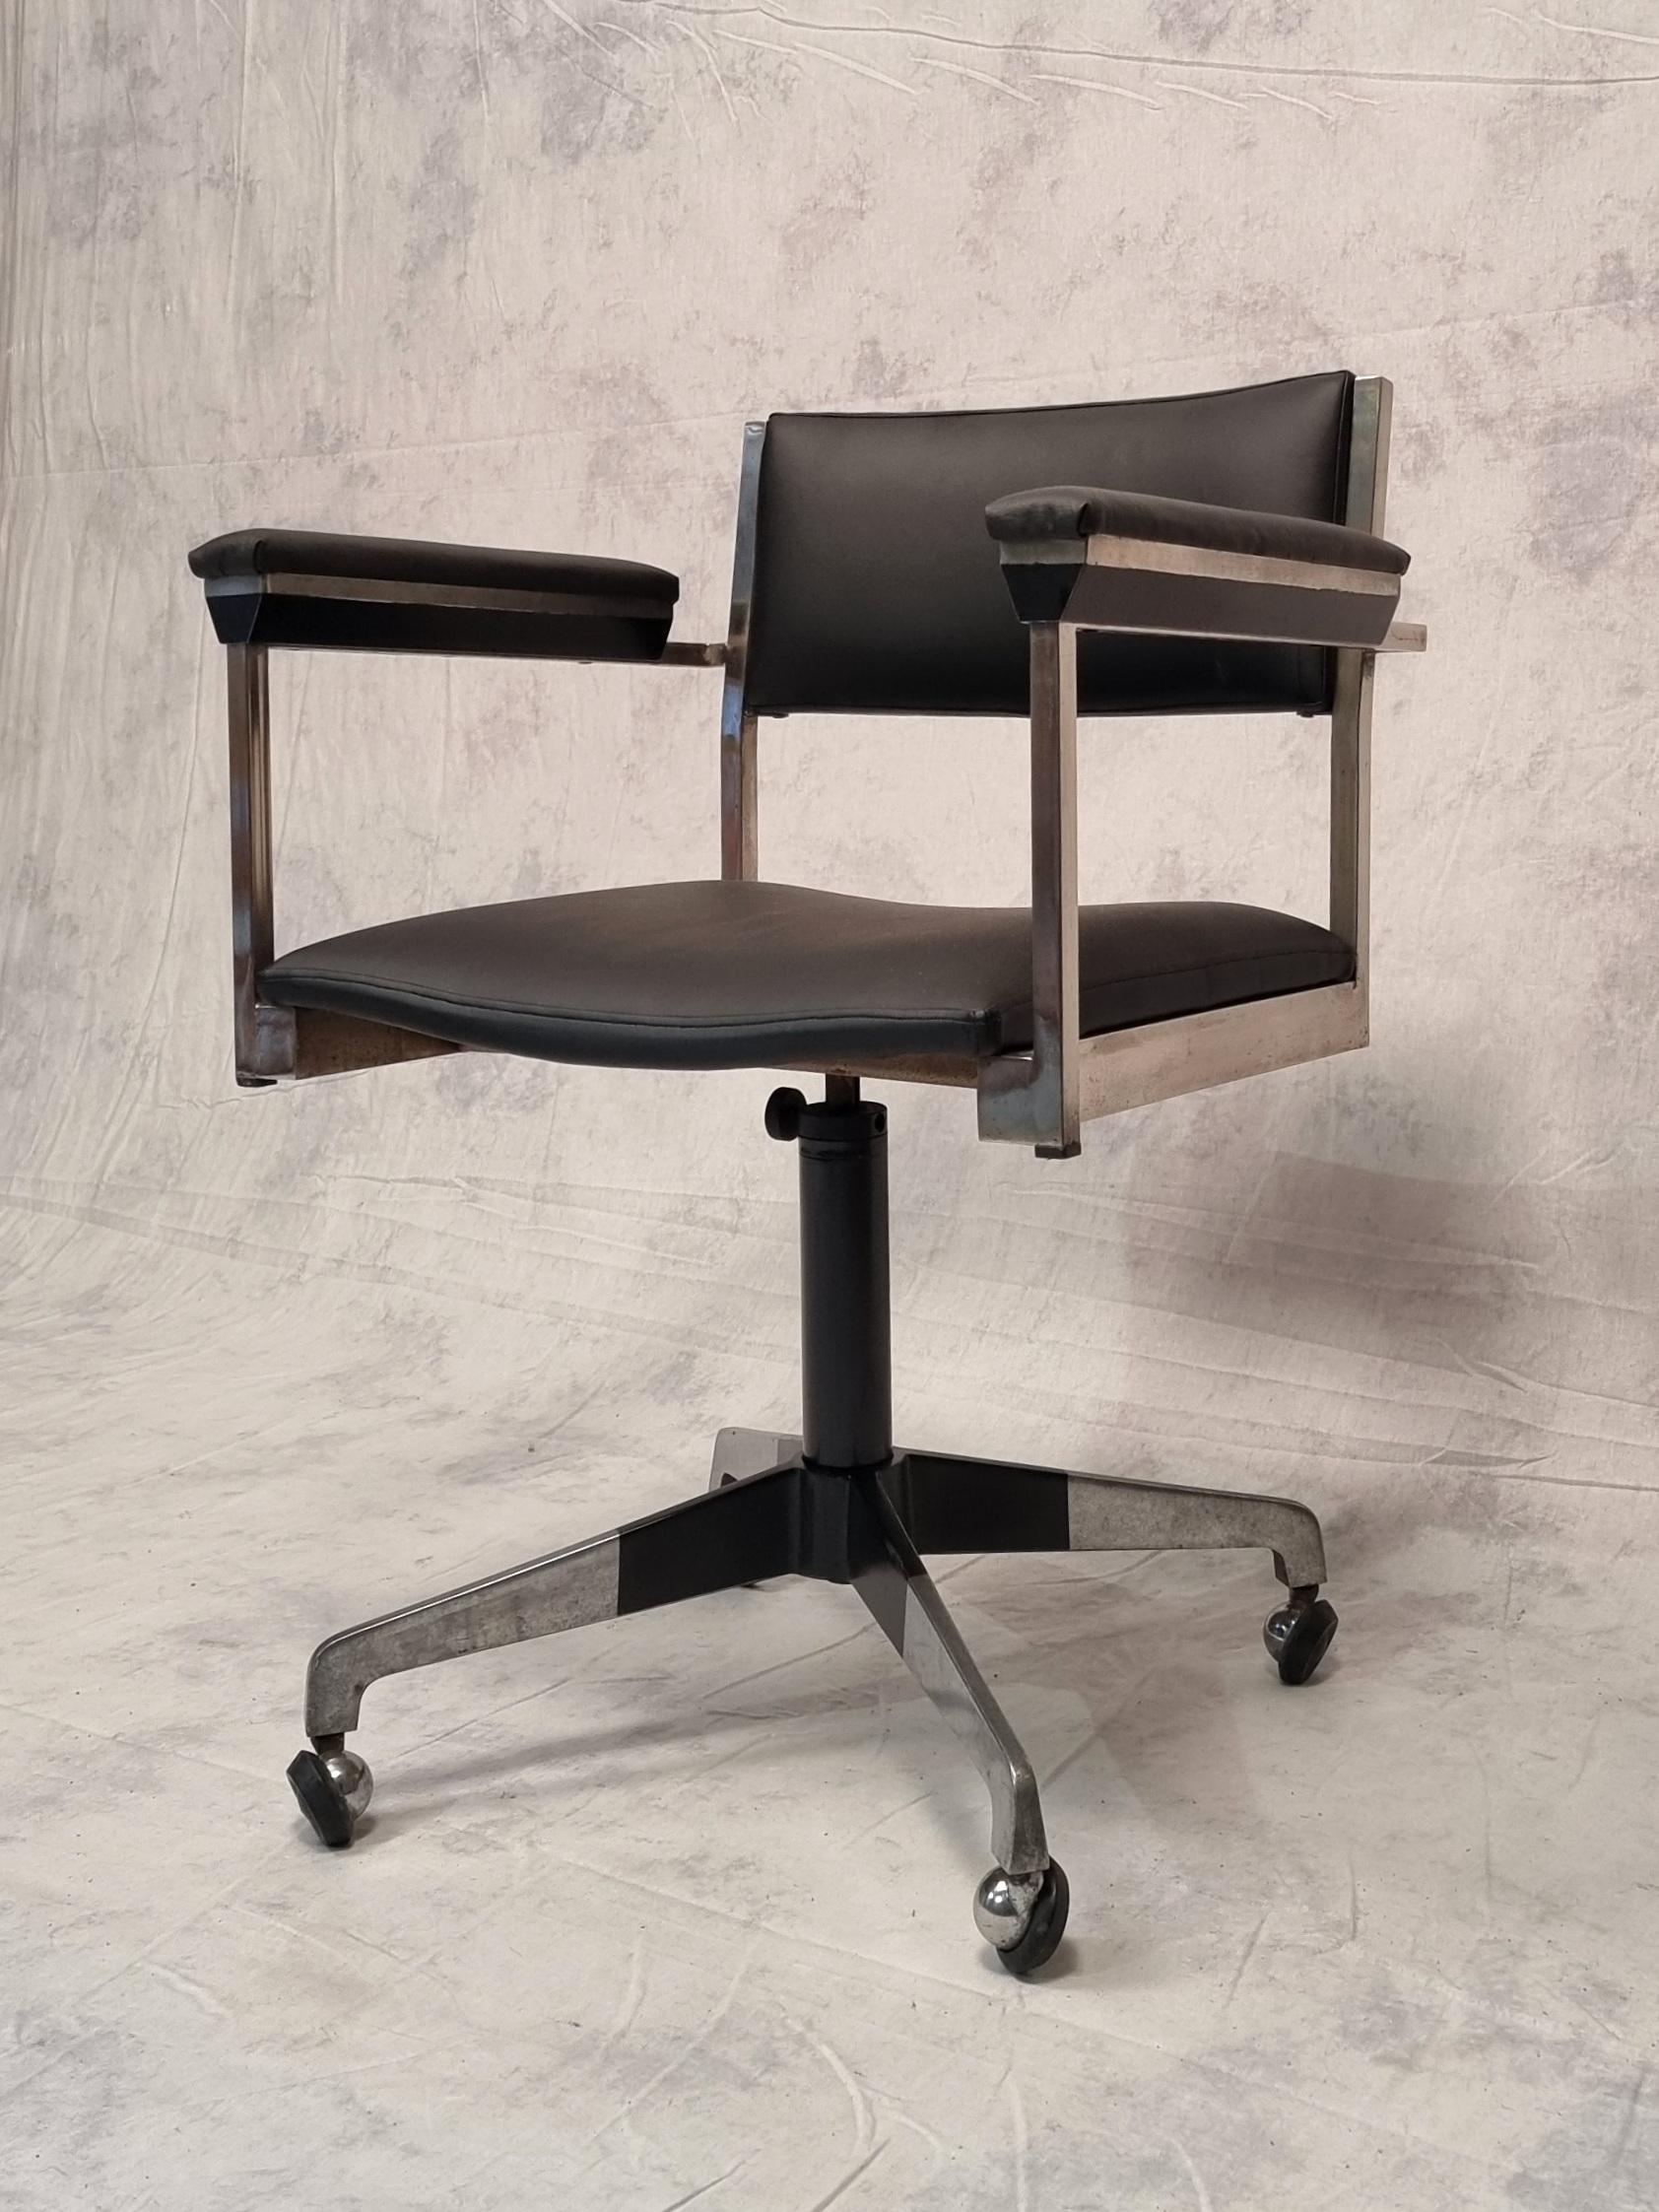 Vintage rotating modernist office chair. German work from the 1960s. Structure in chromed metal and painted black at the base and armrests and upholstered in black imitation leather. Original model with high armrests. A beautiful harmony of colors